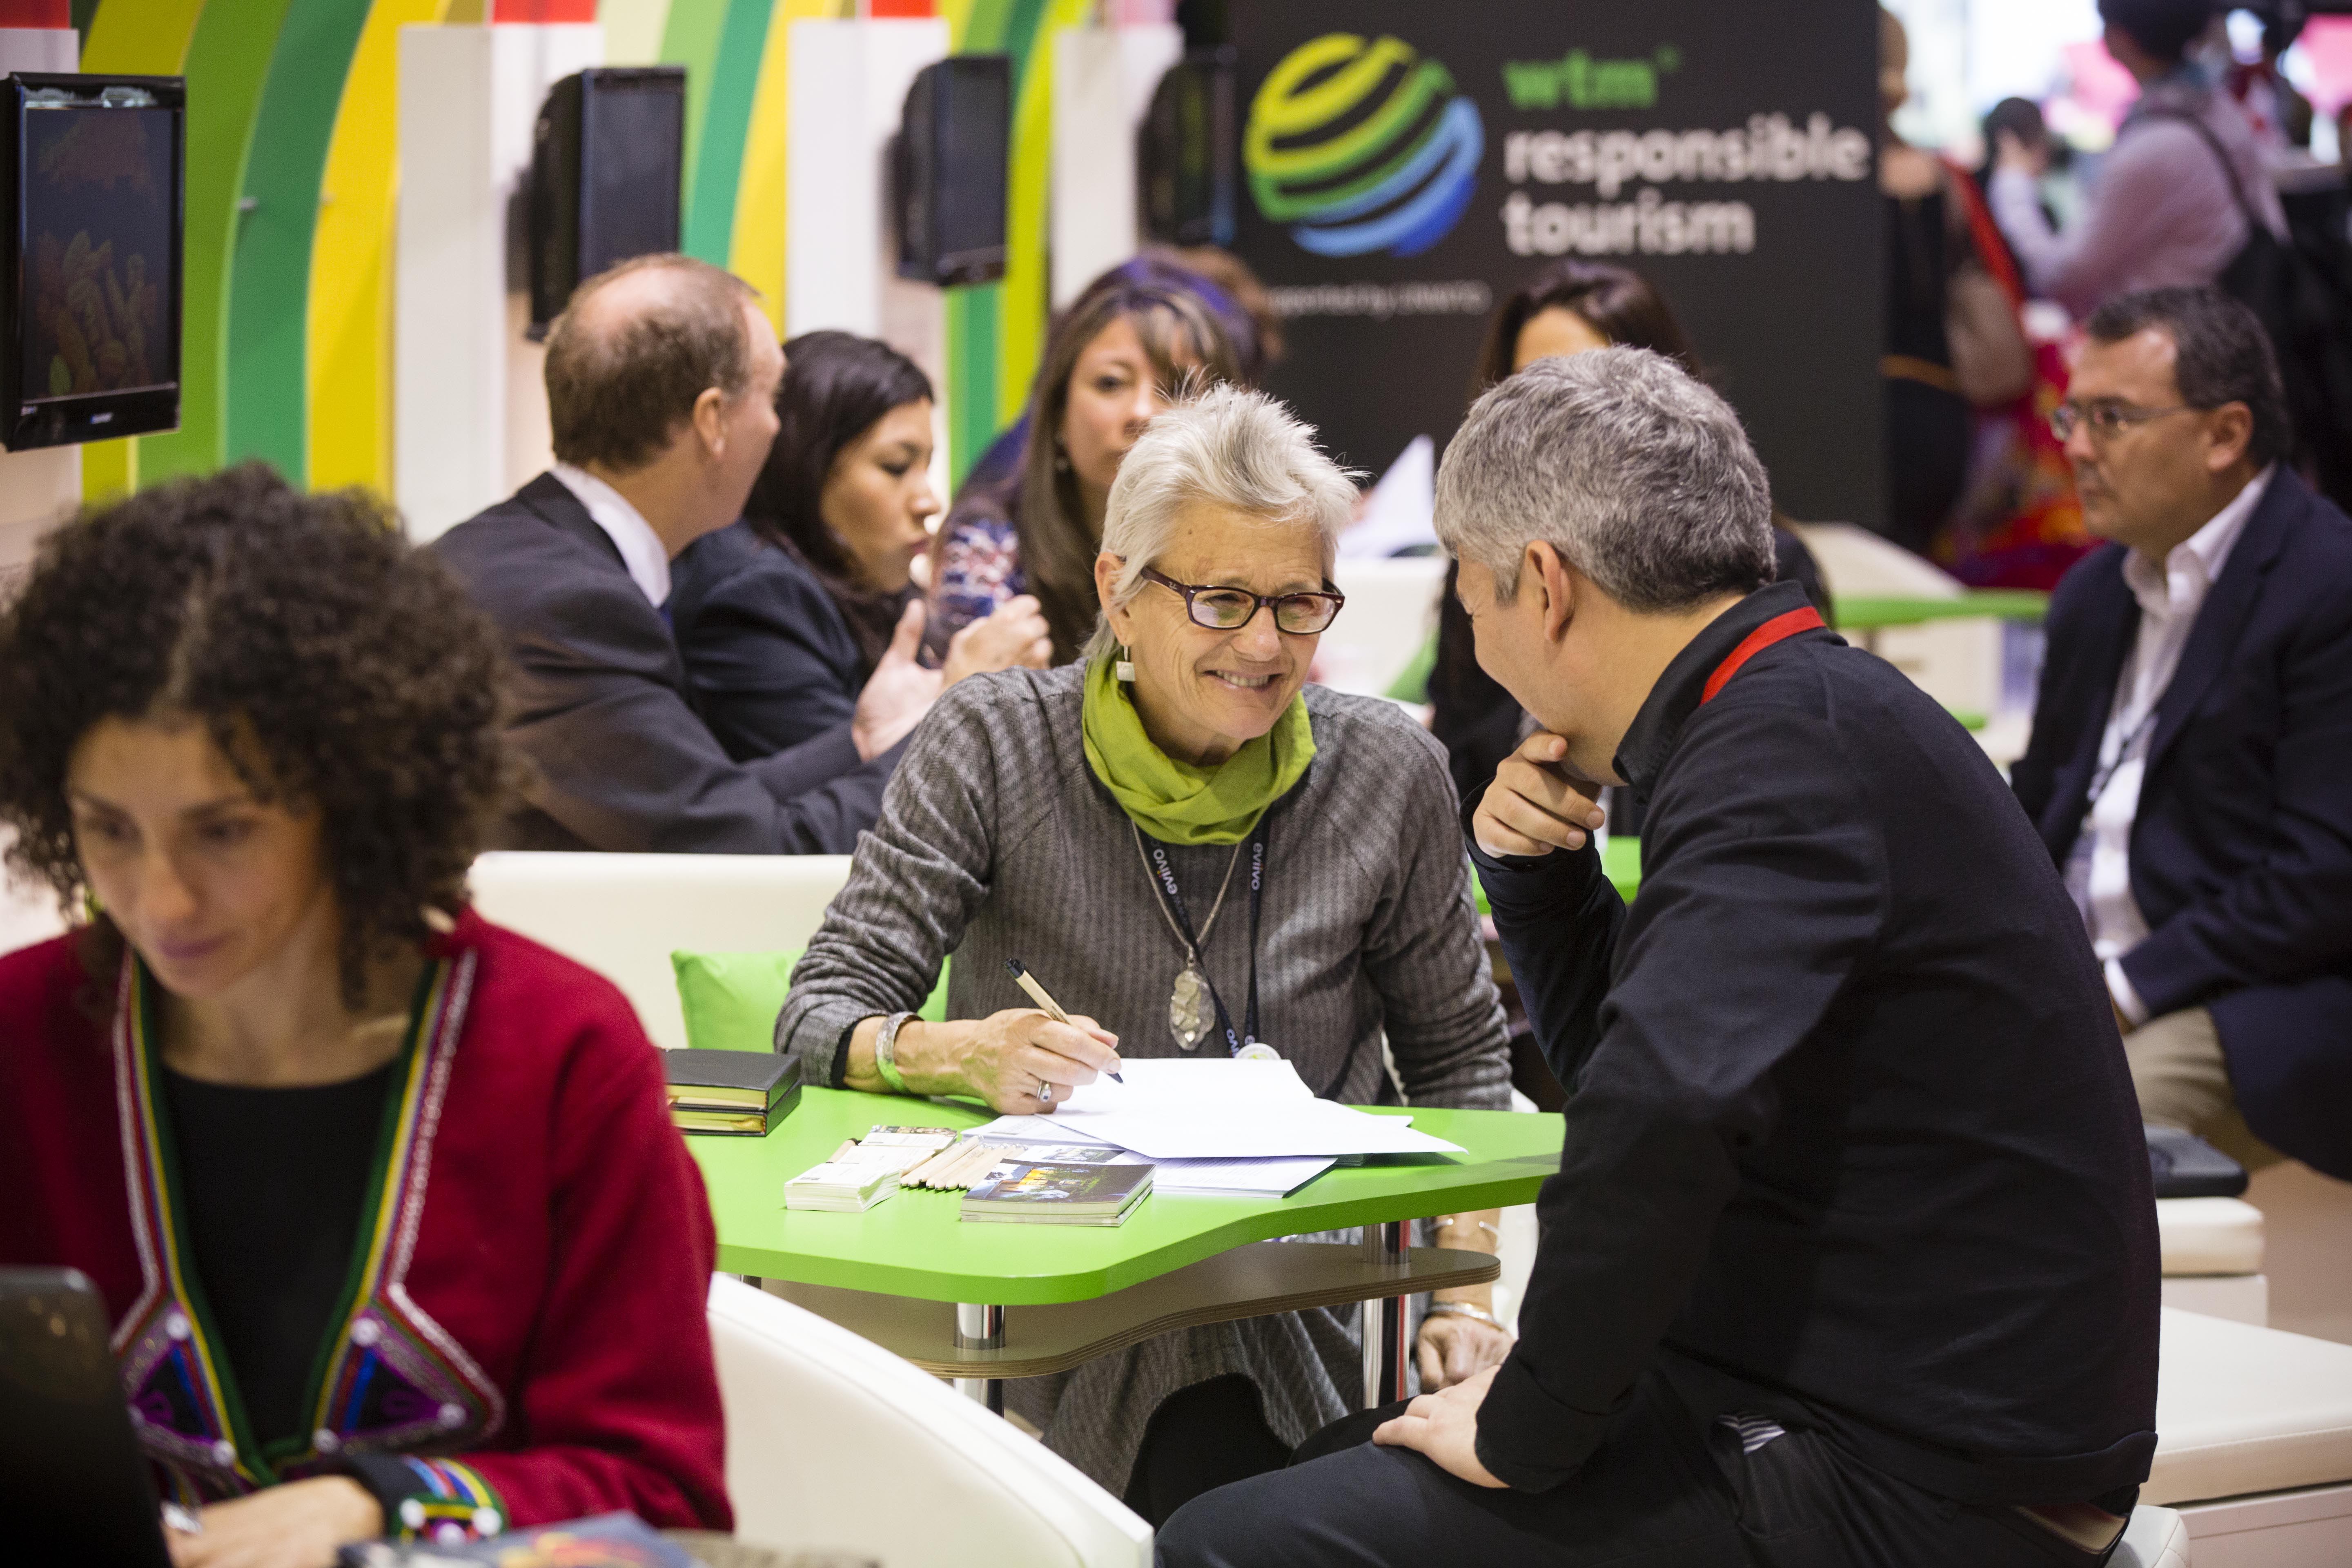 World Responsible Tourism Awards at WTM reveal their widest reach yet with the announcement of the 2015 longlist.